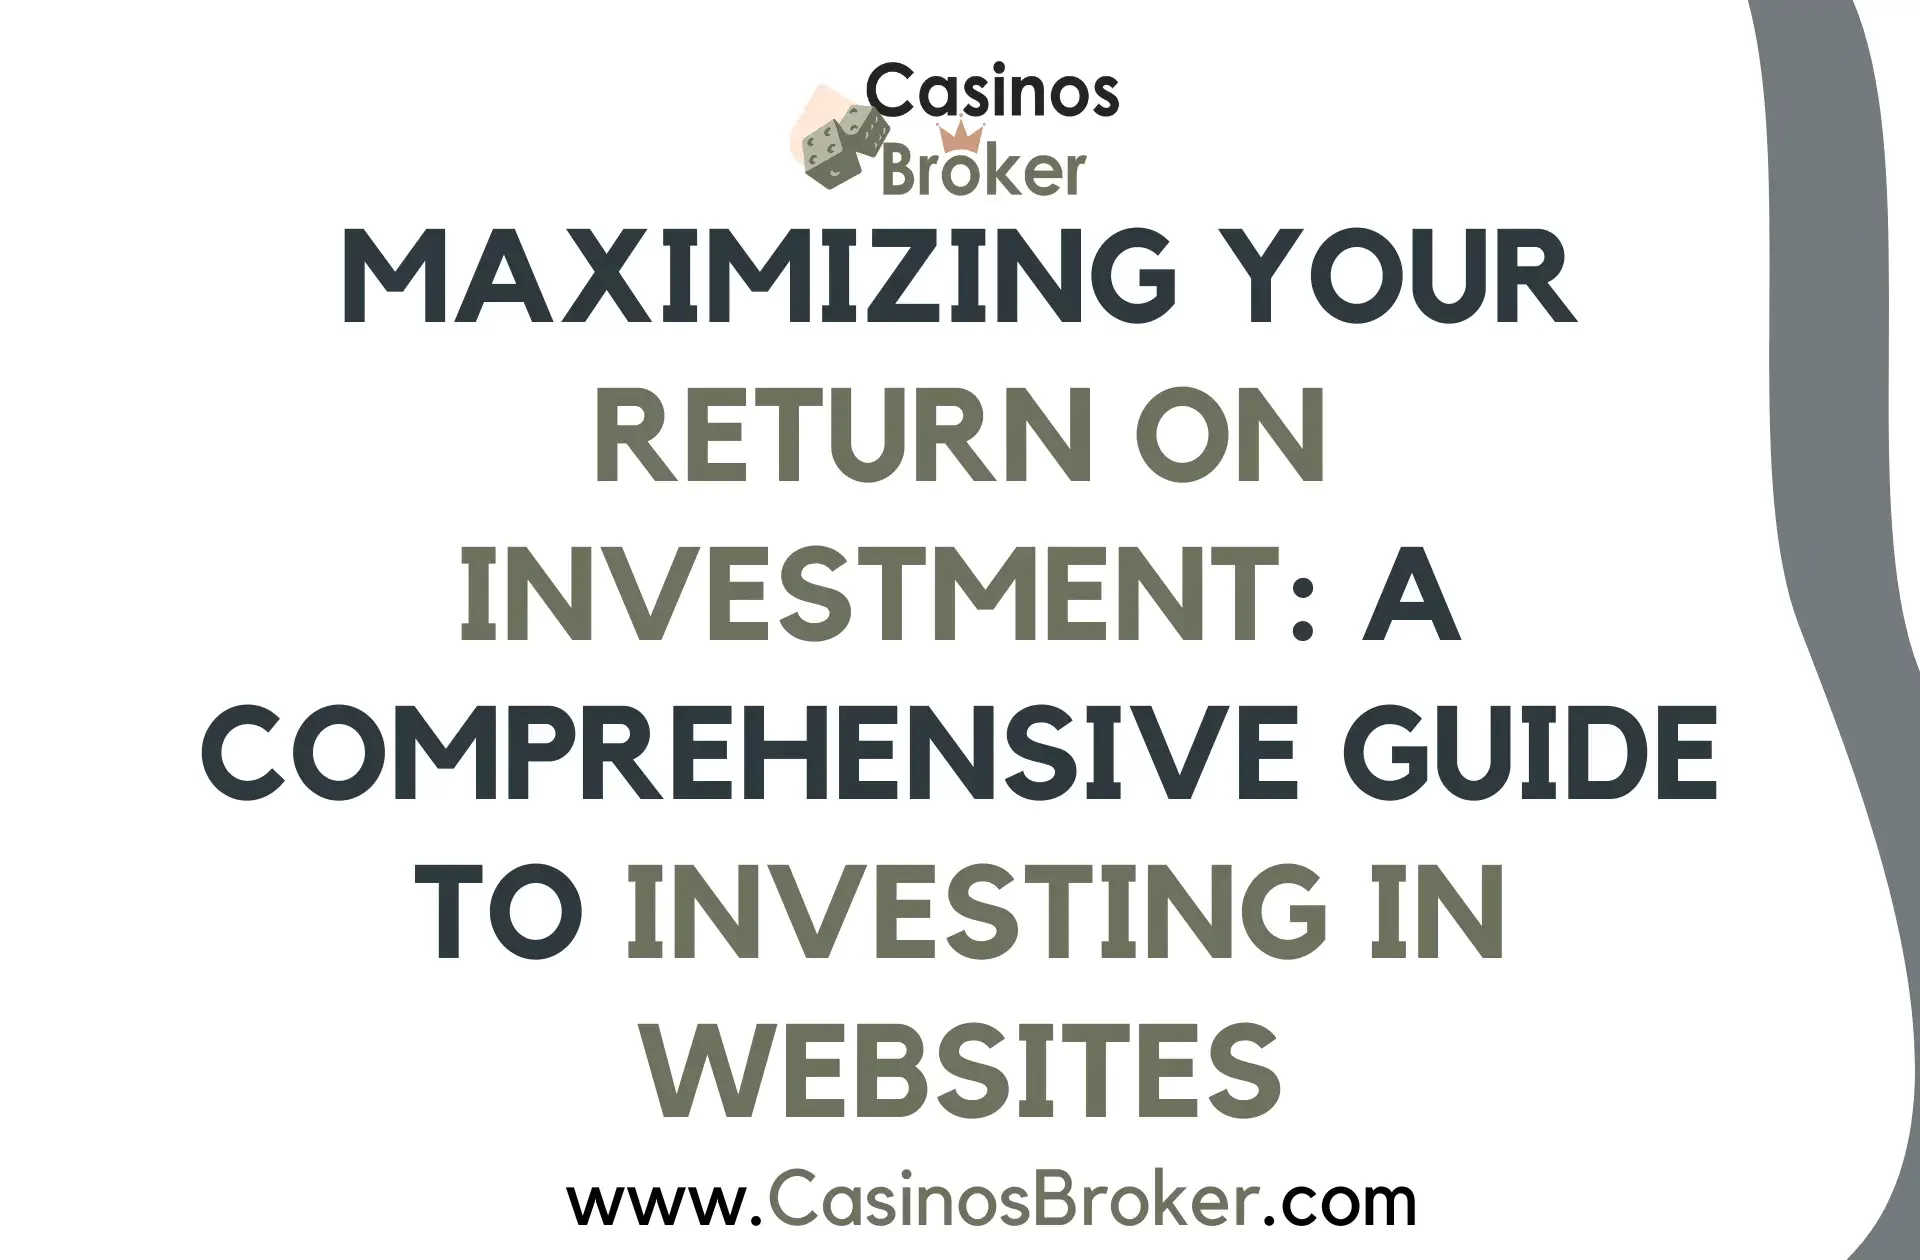 Maximizing Your Return on Investment: A Comprehensive Guide to Investing in Websites